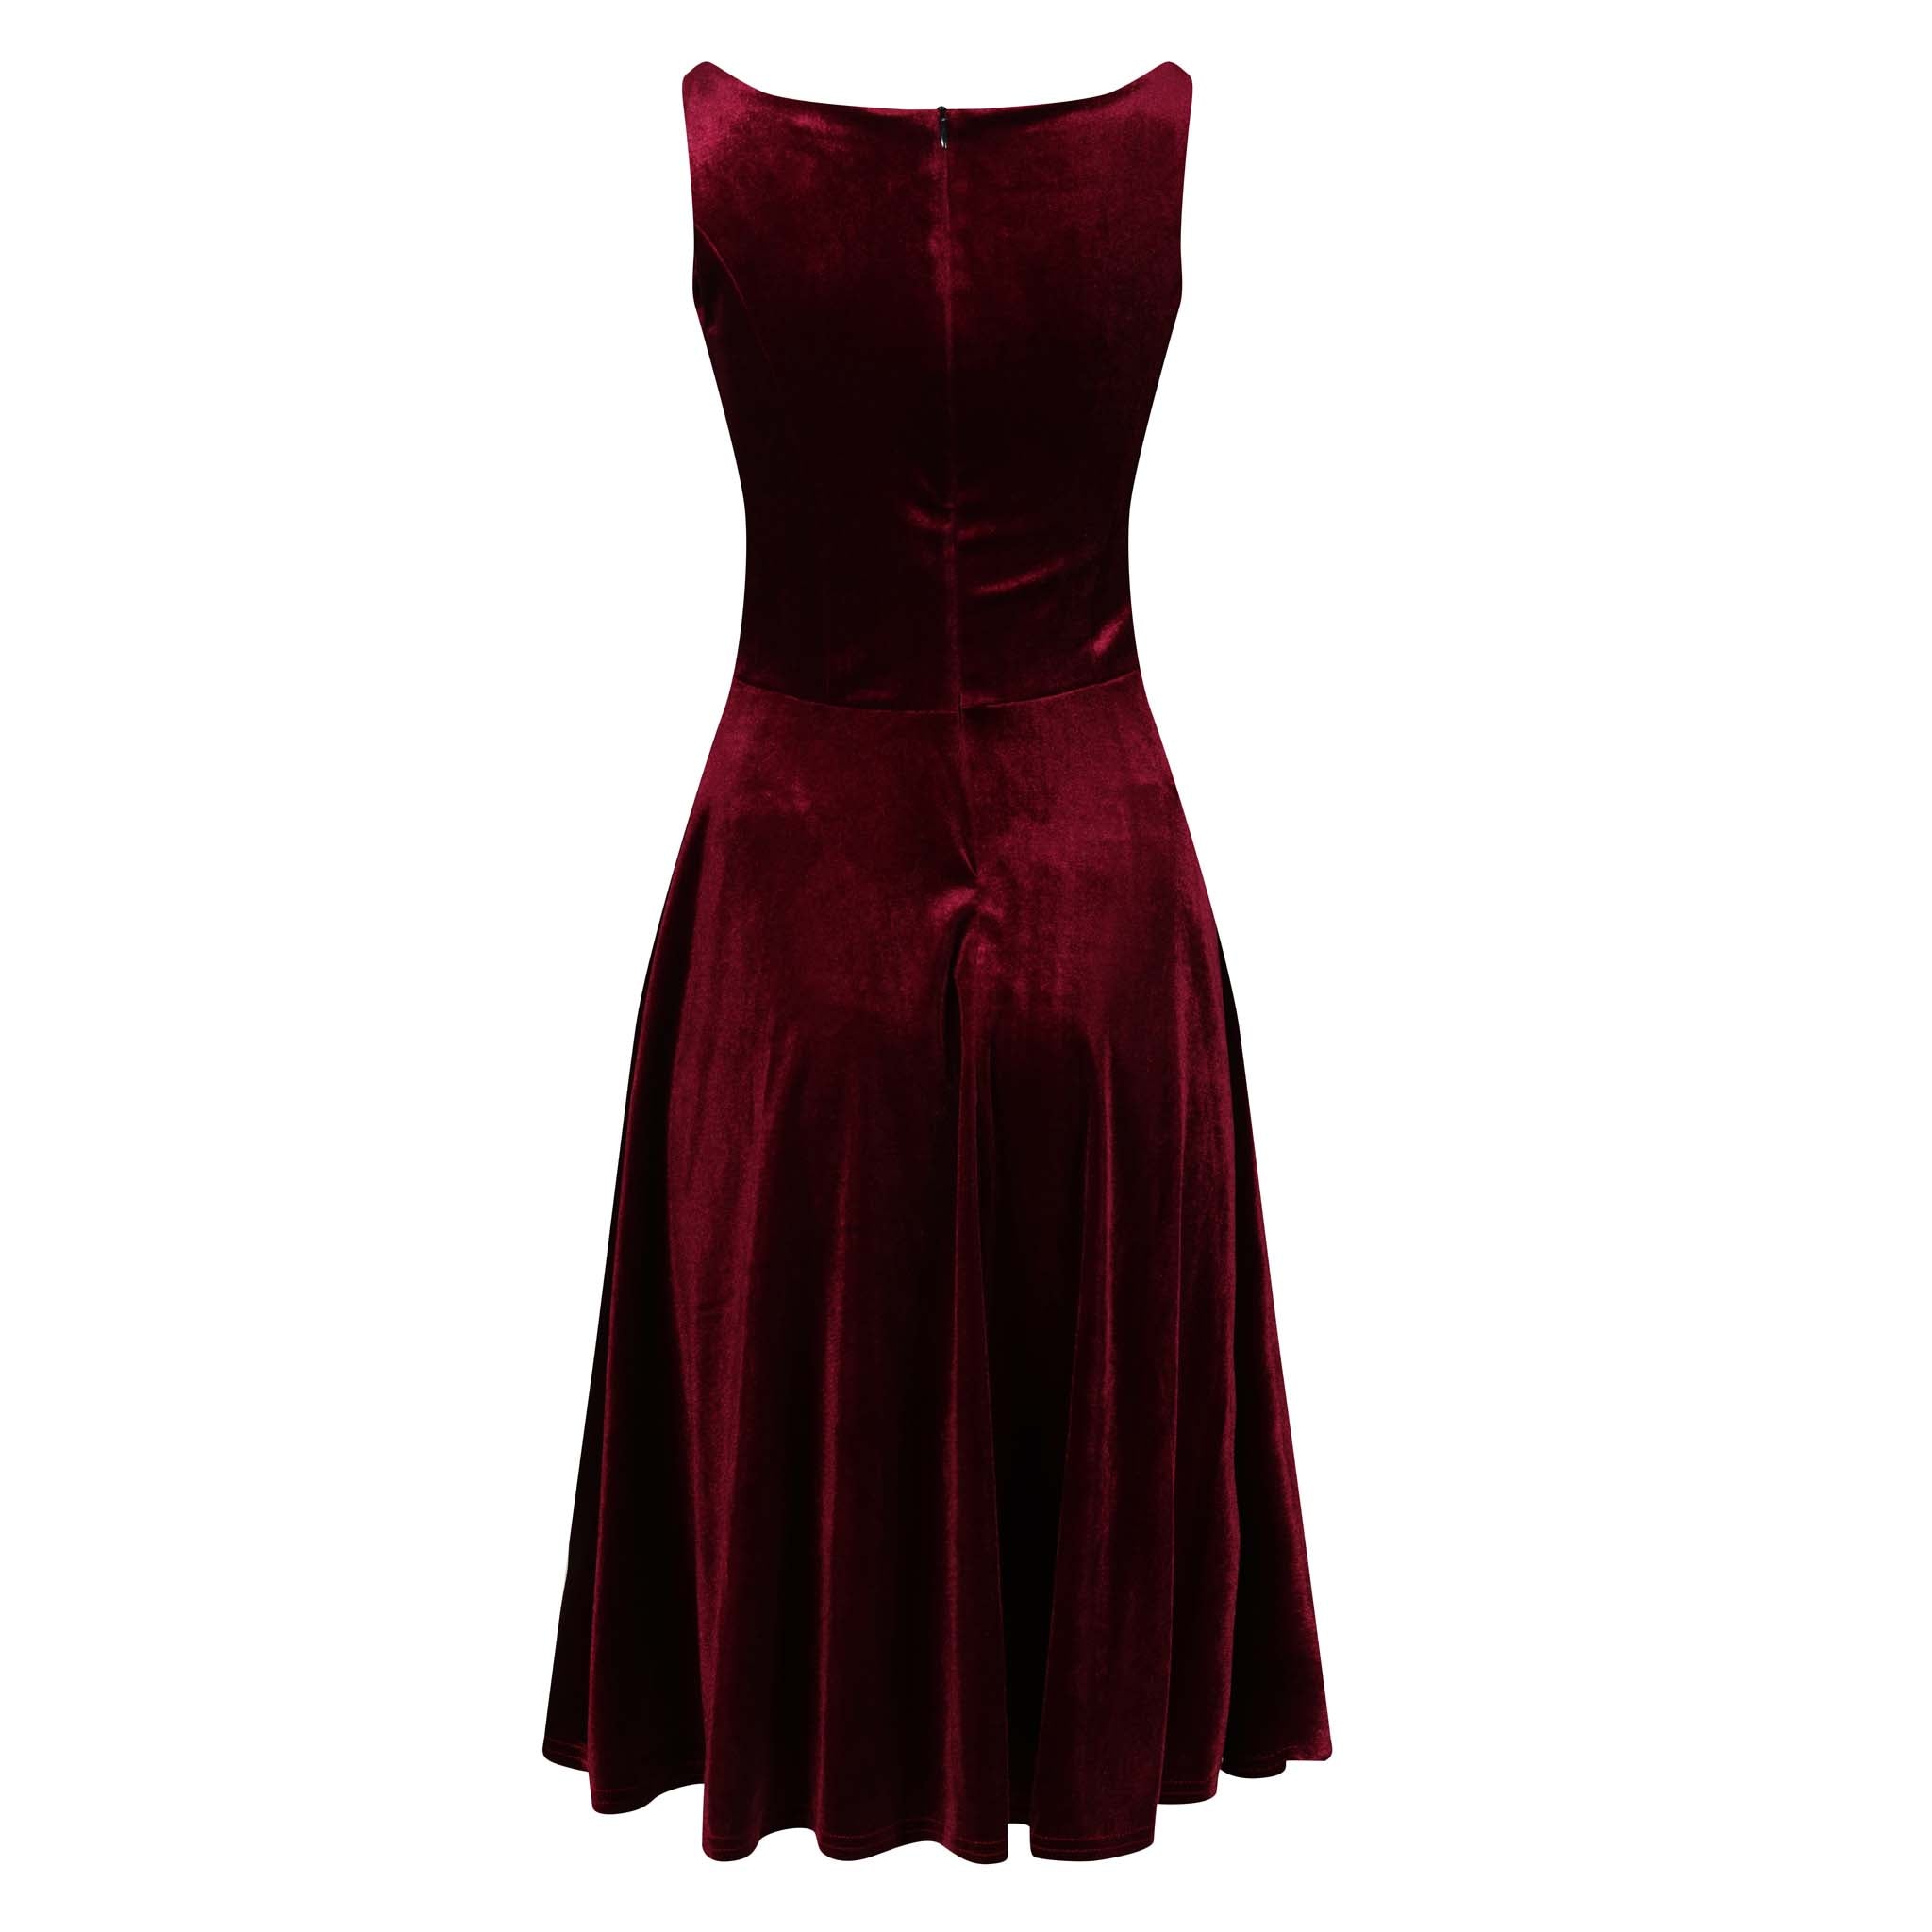 Claret Red Velour Audrey Style 1950s Swing Dress